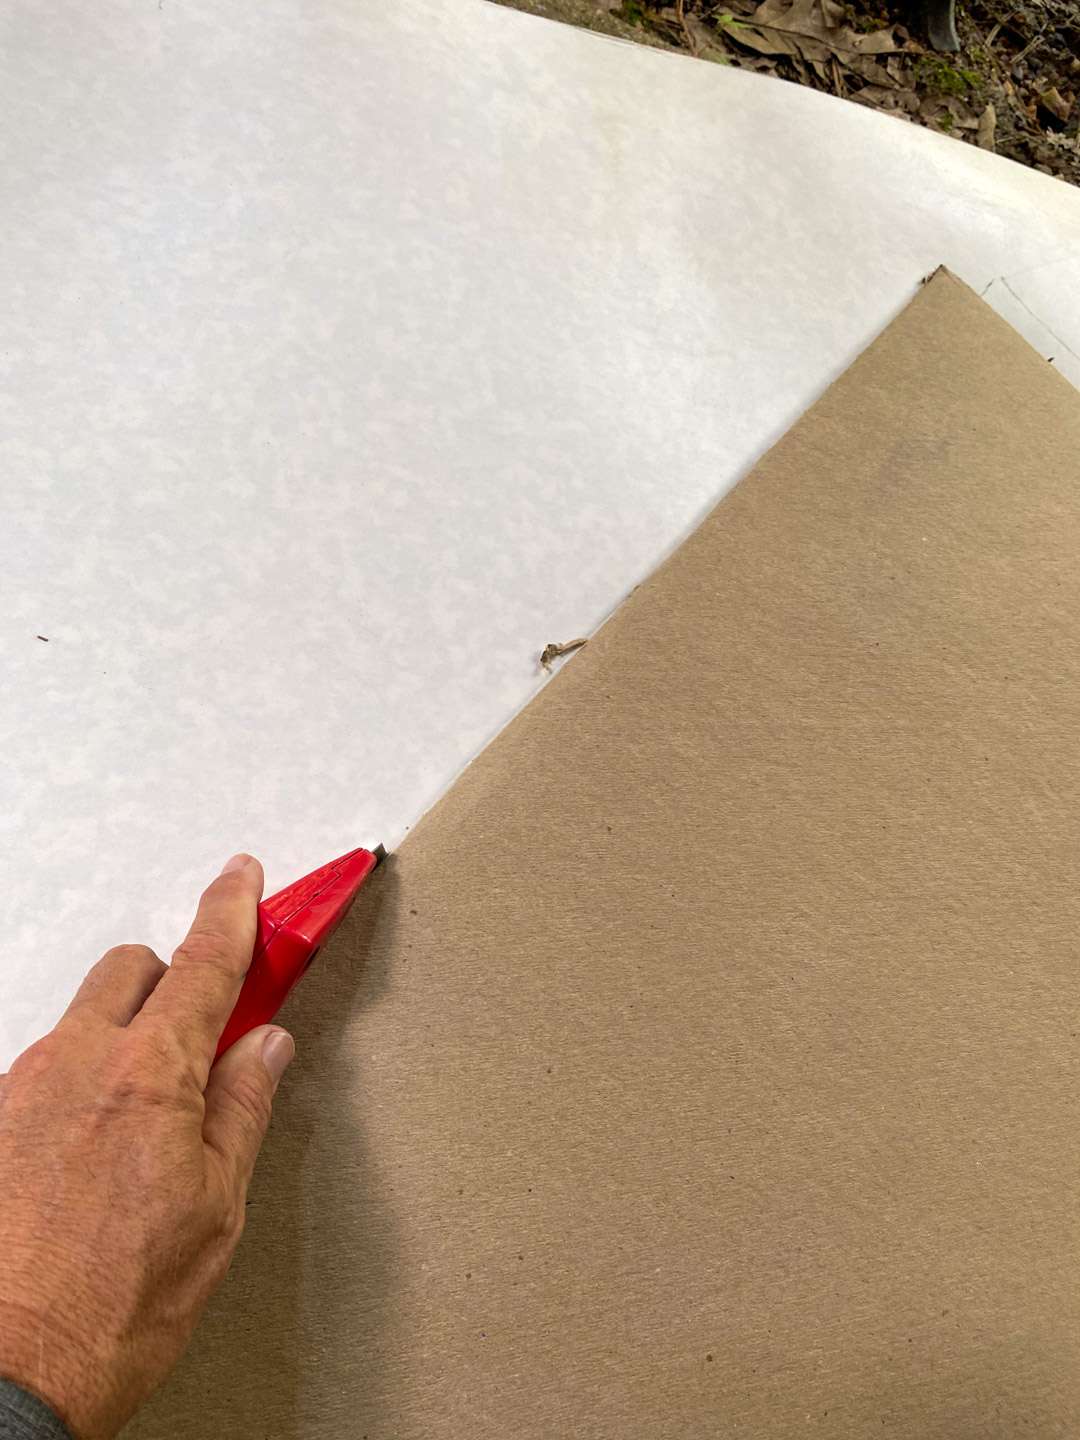 VERY IMPORTANT TIP: When you make a template, mark which side is the TOP. Then, flip the template over when cutting the material. The nose of this Alumacraft was not perfectly square. So, the angles on one side were slightly different than the other. Also, use a fresh razor blade for perfect lines.